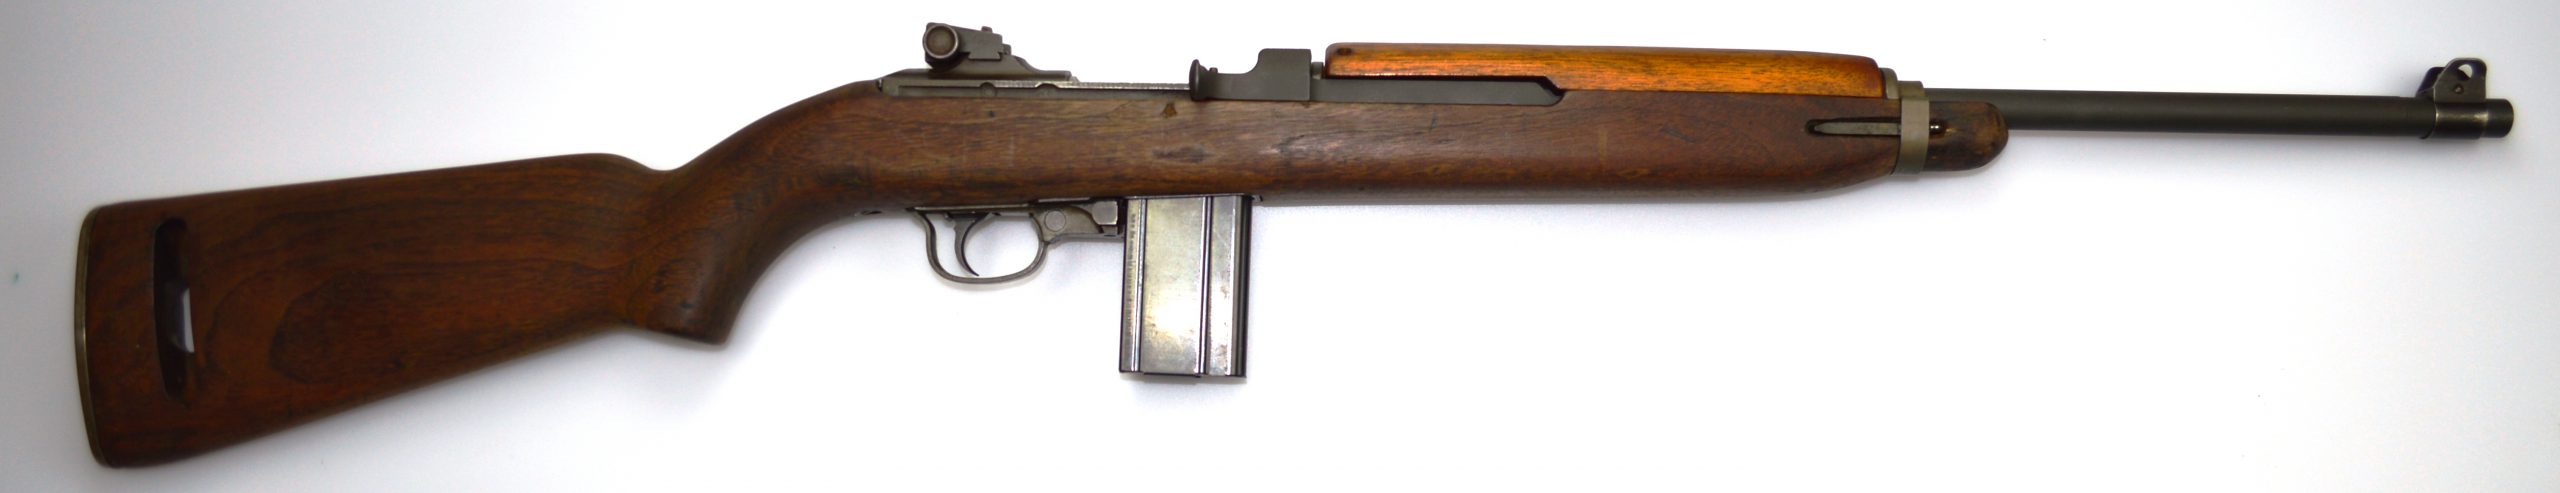 WWII STANDARD PRODUCTS US M1 .30 Caliber CARBINE